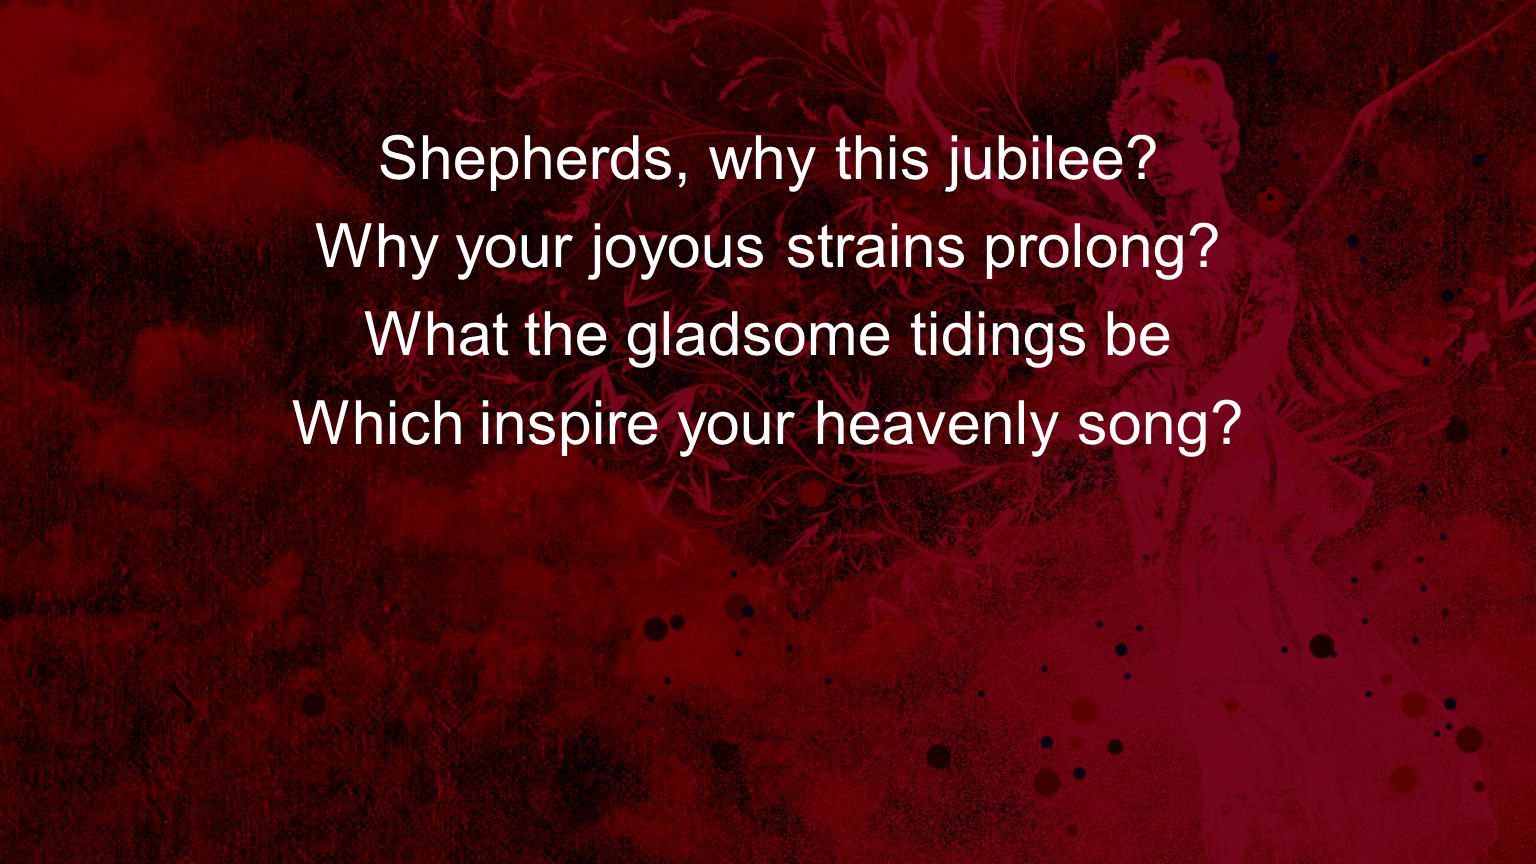 Shepherds, why this jubilee Why your joyous strains prolong